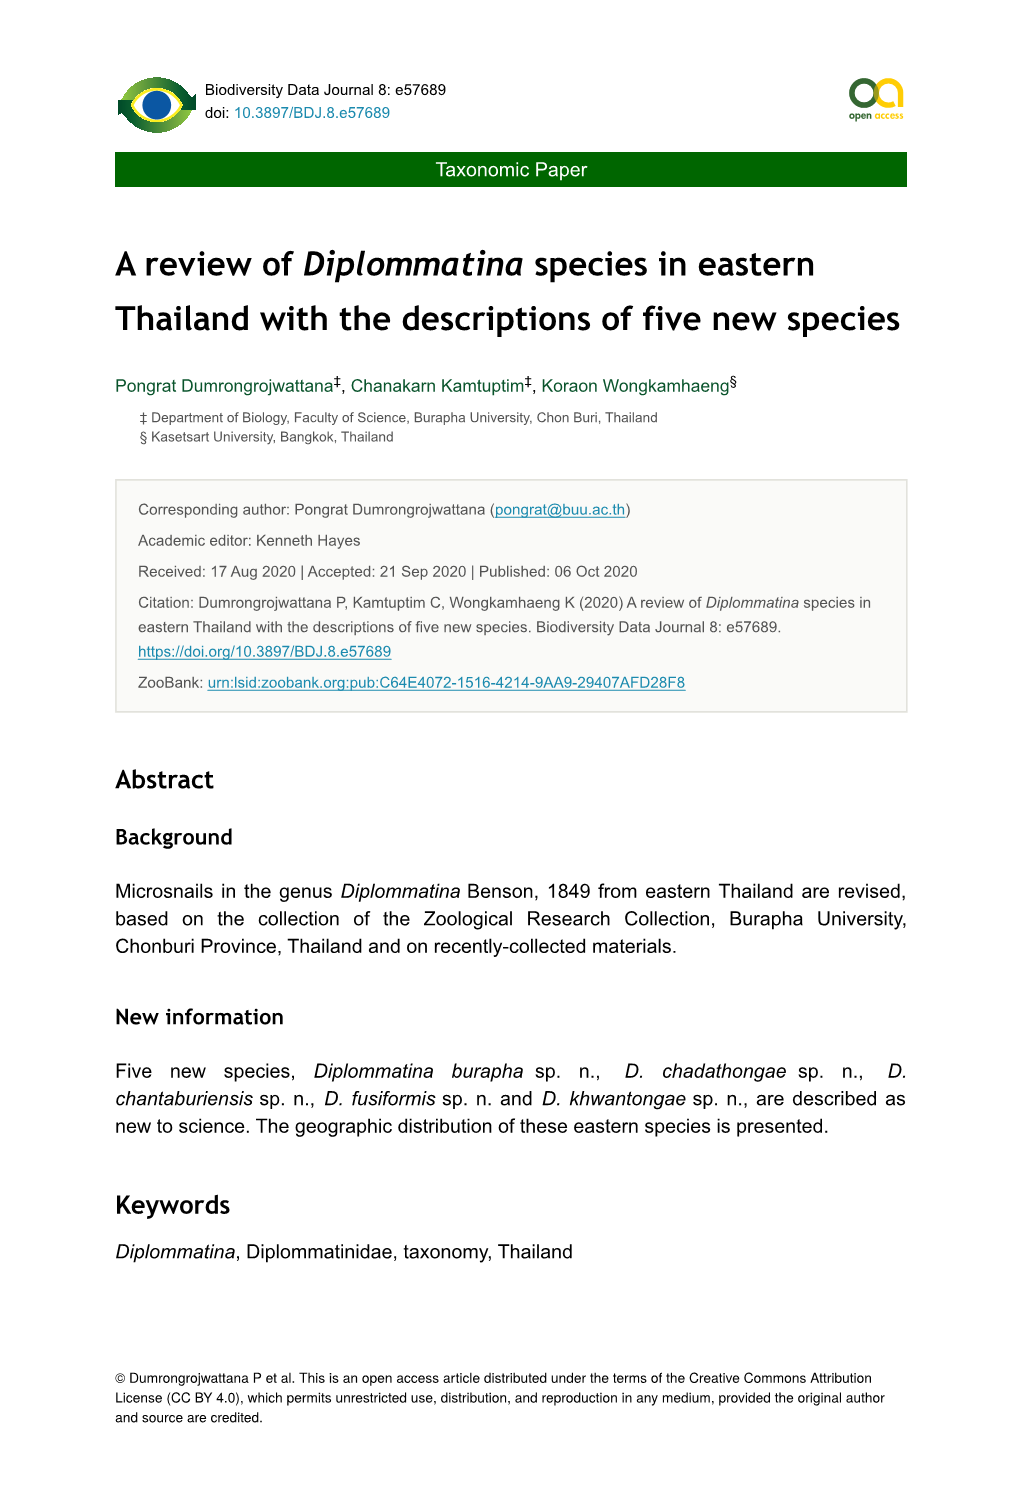 A Review of Diplommatina Species in Eastern Thailand with the Descriptions of Five New Species